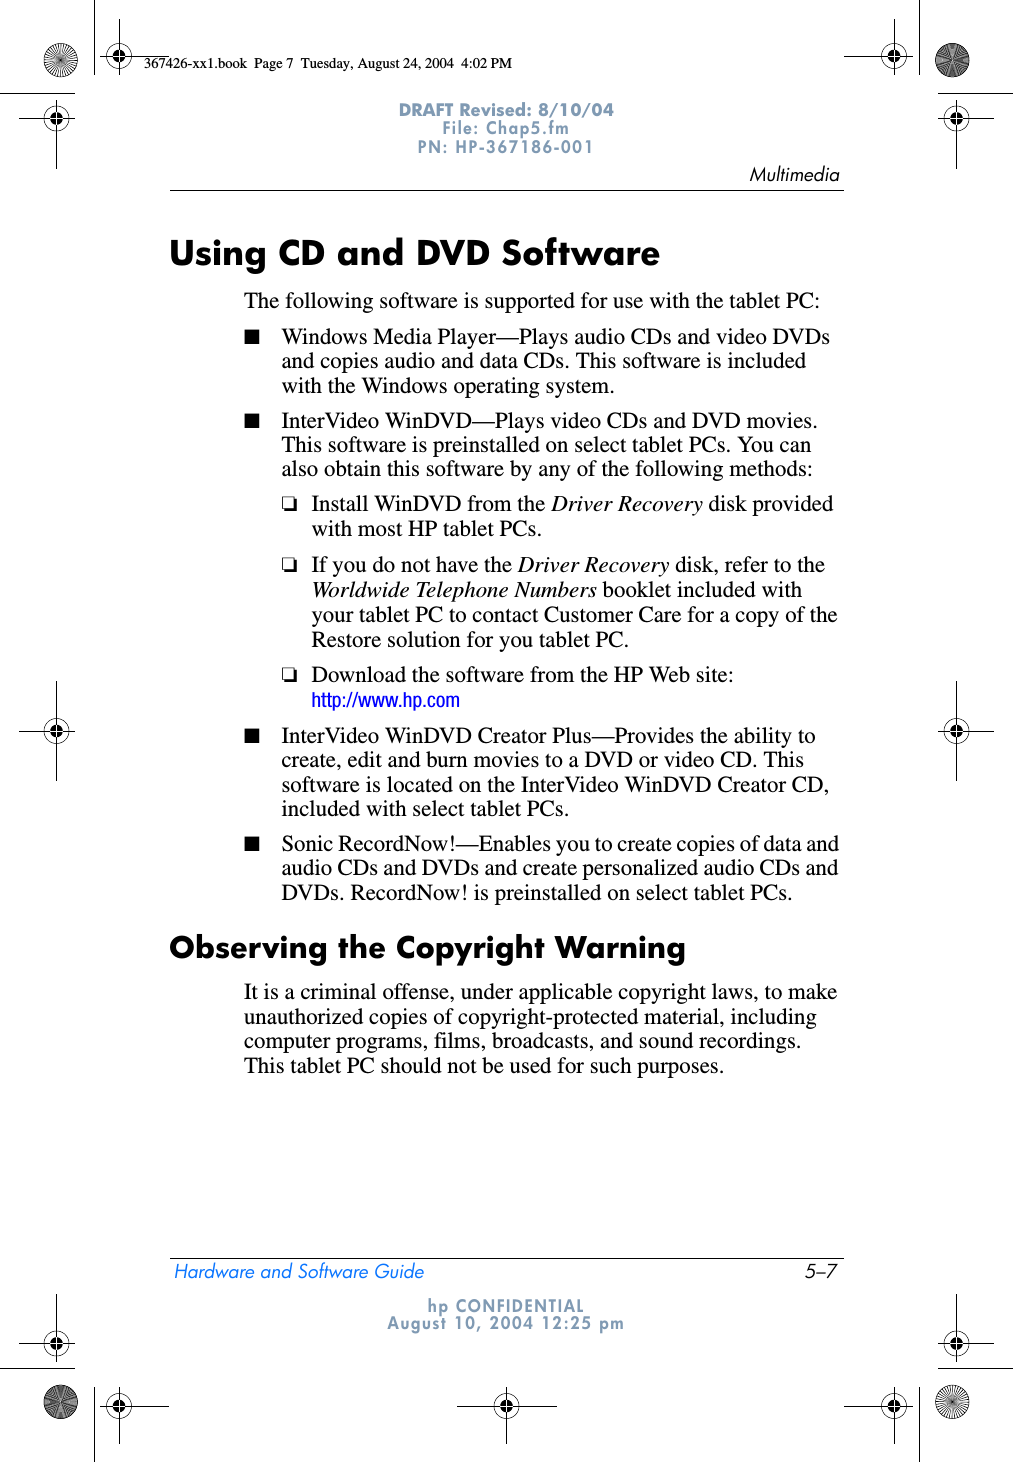 MultimediaHardware and Software Guide 5–7DRAFT Revised: 8/10/04File: Chap5.fm PN: HP-367186-001 hp CONFIDENTIALAugust 10, 2004 12:25 pmUsing CD and DVD SoftwareThe following software is supported for use with the tablet PC:■Windows Media Player—Plays audio CDs and video DVDs and copies audio and data CDs. This software is included with the Windows operating system.■InterVideo WinDVD—Plays video CDs and DVD movies. This software is preinstalled on select tablet PCs. You can also obtain this software by any of the following methods:❏Install WinDVD from the Driver Recovery disk provided with most HP tablet PCs.❏If you do not have the Driver Recovery disk, refer to the Worldwide Telephone Numbers booklet included with your tablet PC to contact Customer Care for a copy of the Restore solution for you tablet PC.❏Download the software from the HP Web site: http://www.hp.com■InterVideo WinDVD Creator Plus—Provides the ability to create, edit and burn movies to a DVD or video CD. This software is located on the InterVideo WinDVD Creator CD, included with select tablet PCs.■Sonic RecordNow!—Enables you to create copies of data and audio CDs and DVDs and create personalized audio CDs and DVDs. RecordNow! is preinstalled on select tablet PCs.Observing the Copyright WarningIt is a criminal offense, under applicable copyright laws, to make unauthorized copies of copyright-protected material, including computer programs, films, broadcasts, and sound recordings. This tablet PC should not be used for such purposes.367426-xx1.book  Page 7  Tuesday, August 24, 2004  4:02 PM